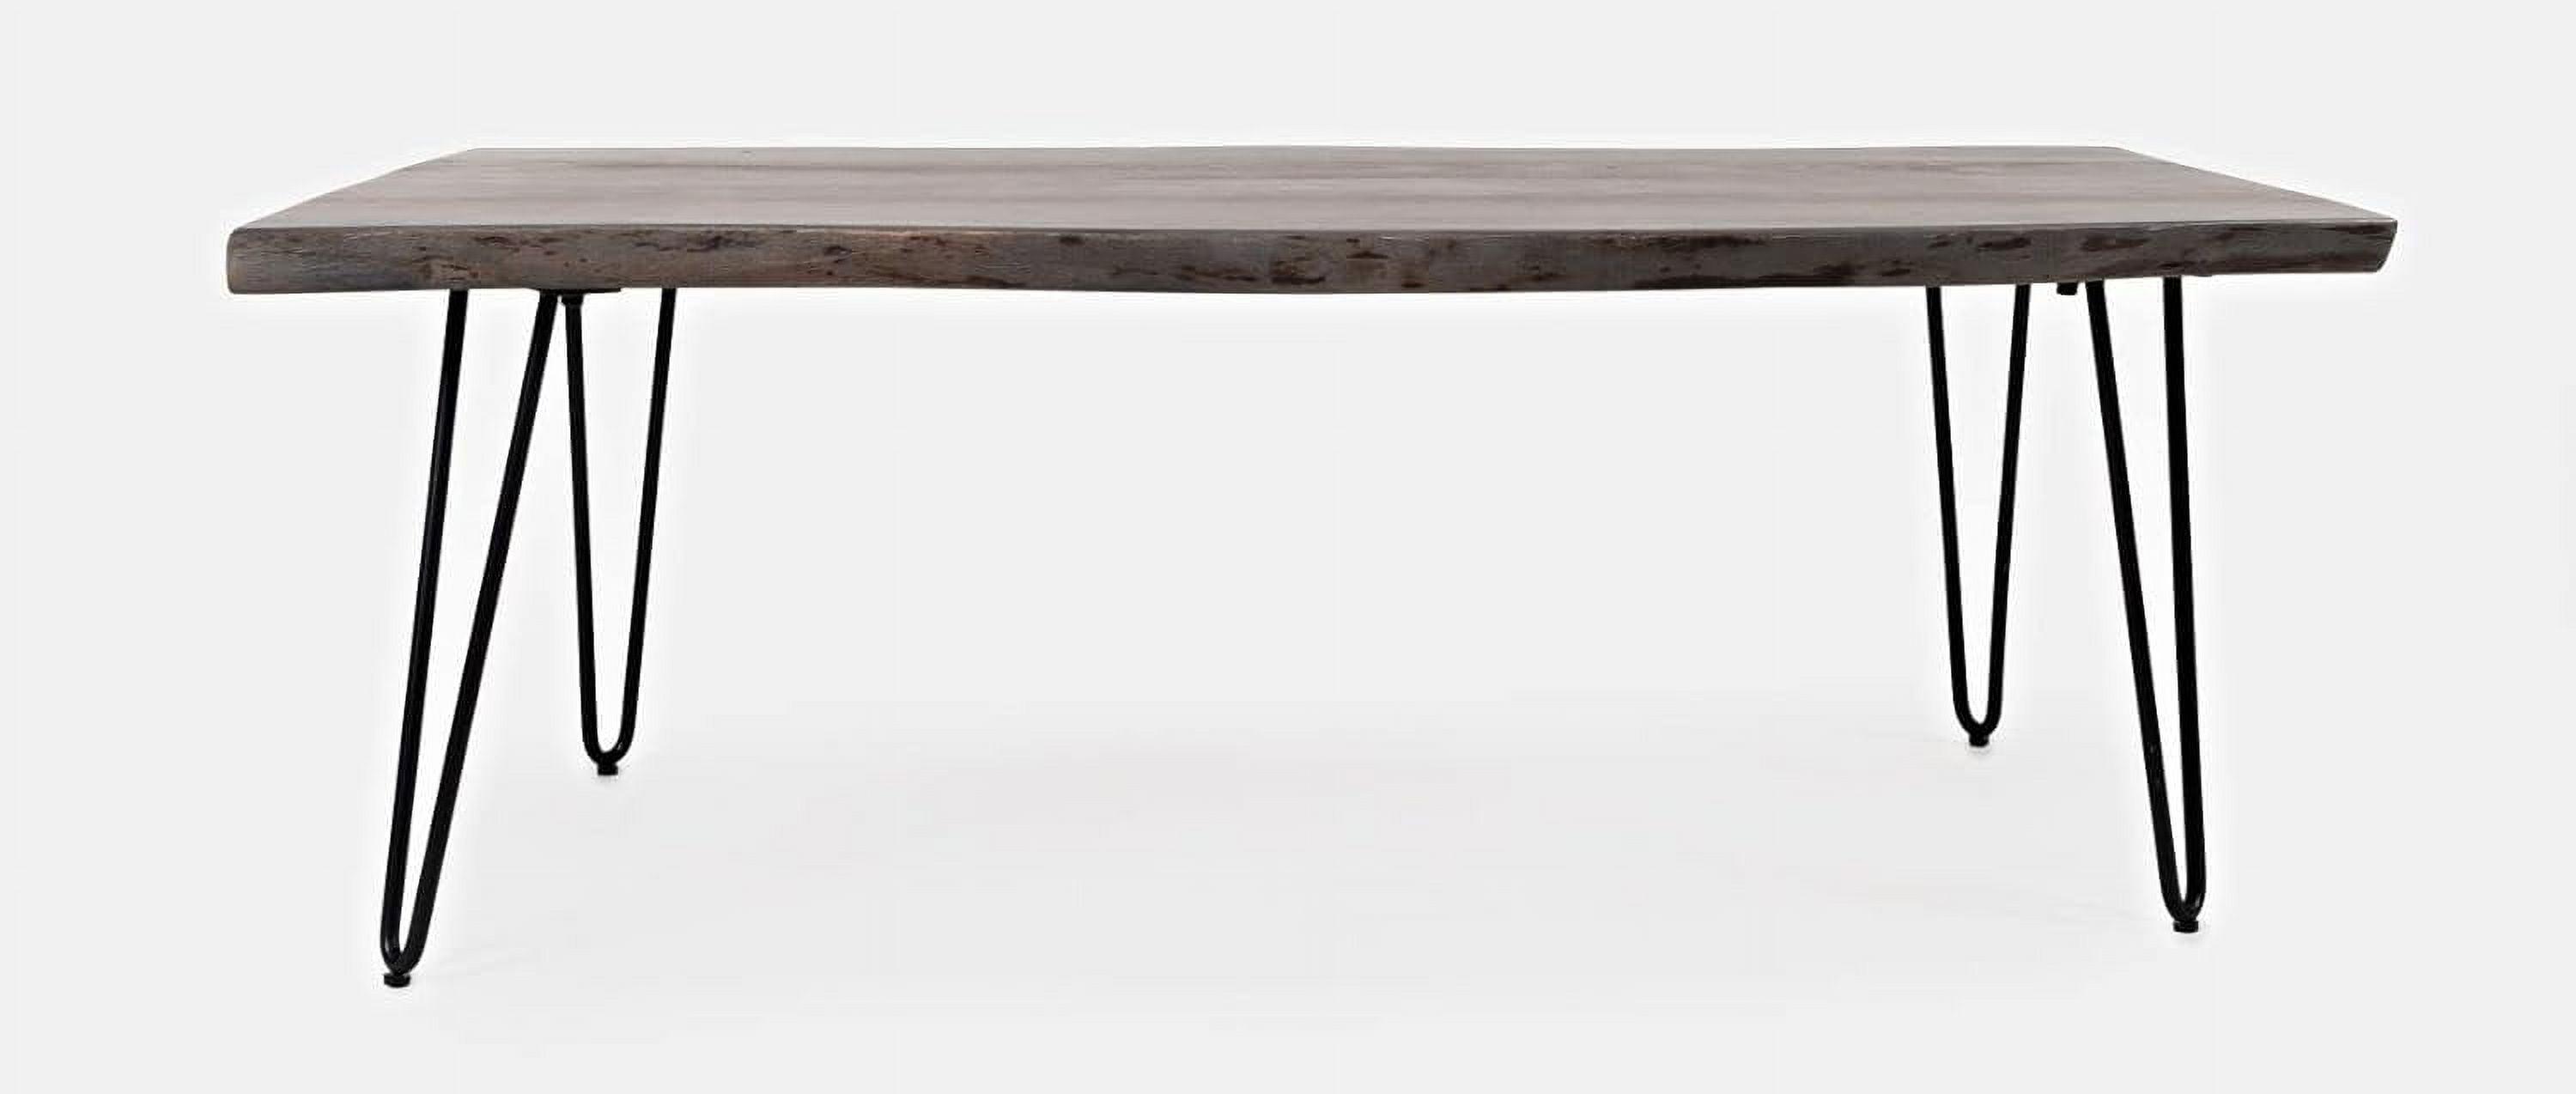 Transitional Slate Gray/Brown Acacia Wood Coffee Table with Metal Legs